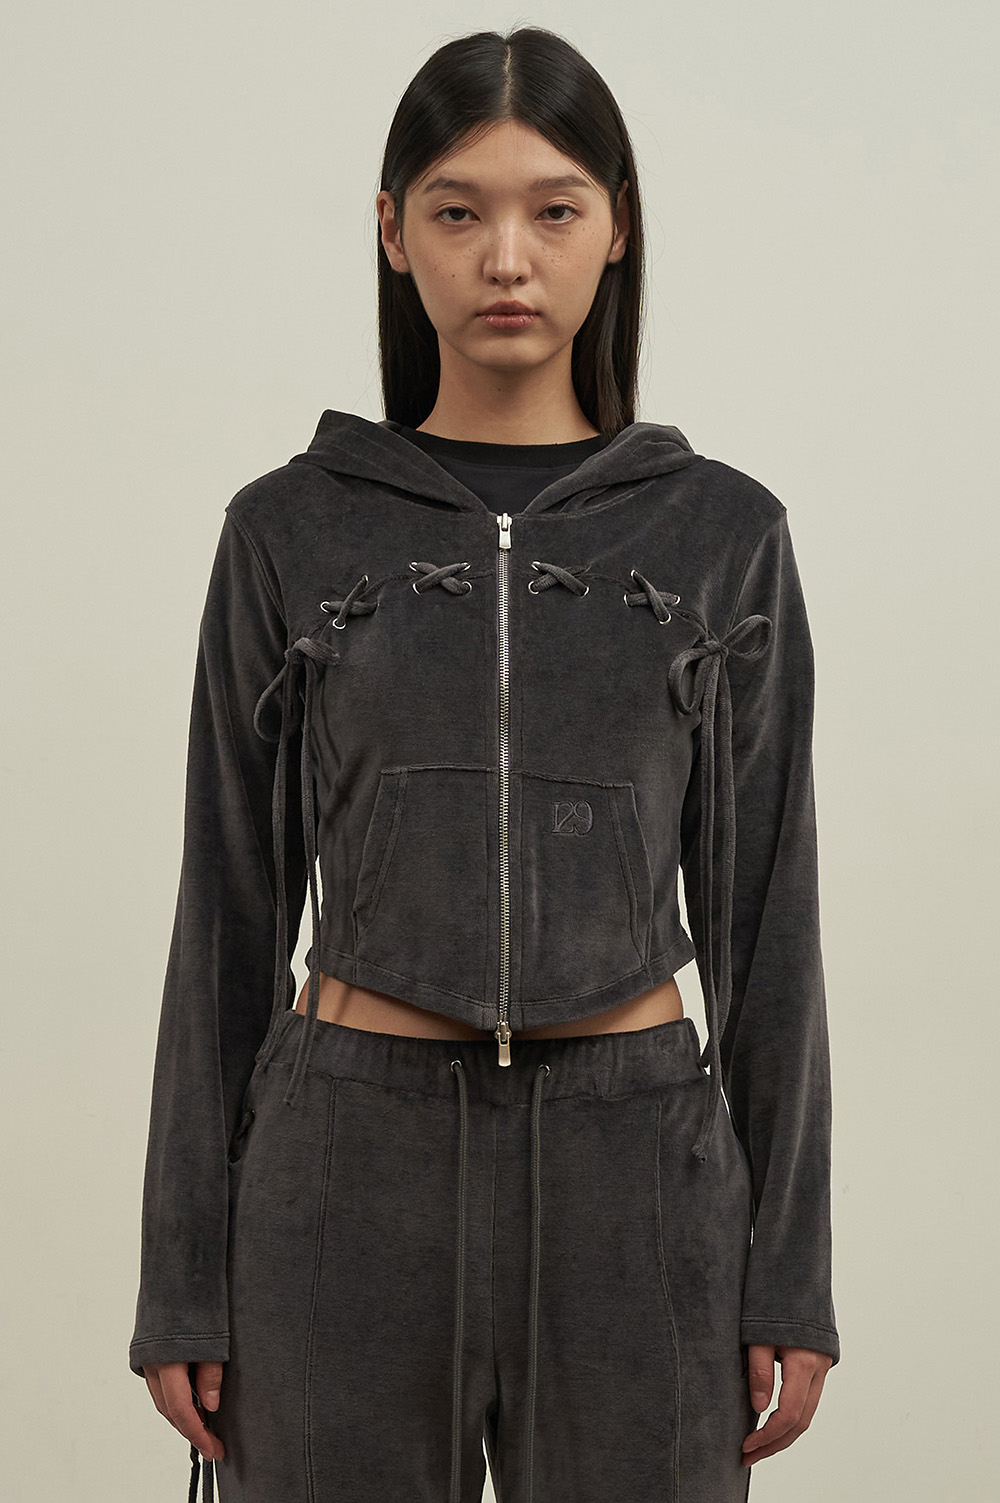 Veloa Lace Up Hooded Zip-Up Charcoal